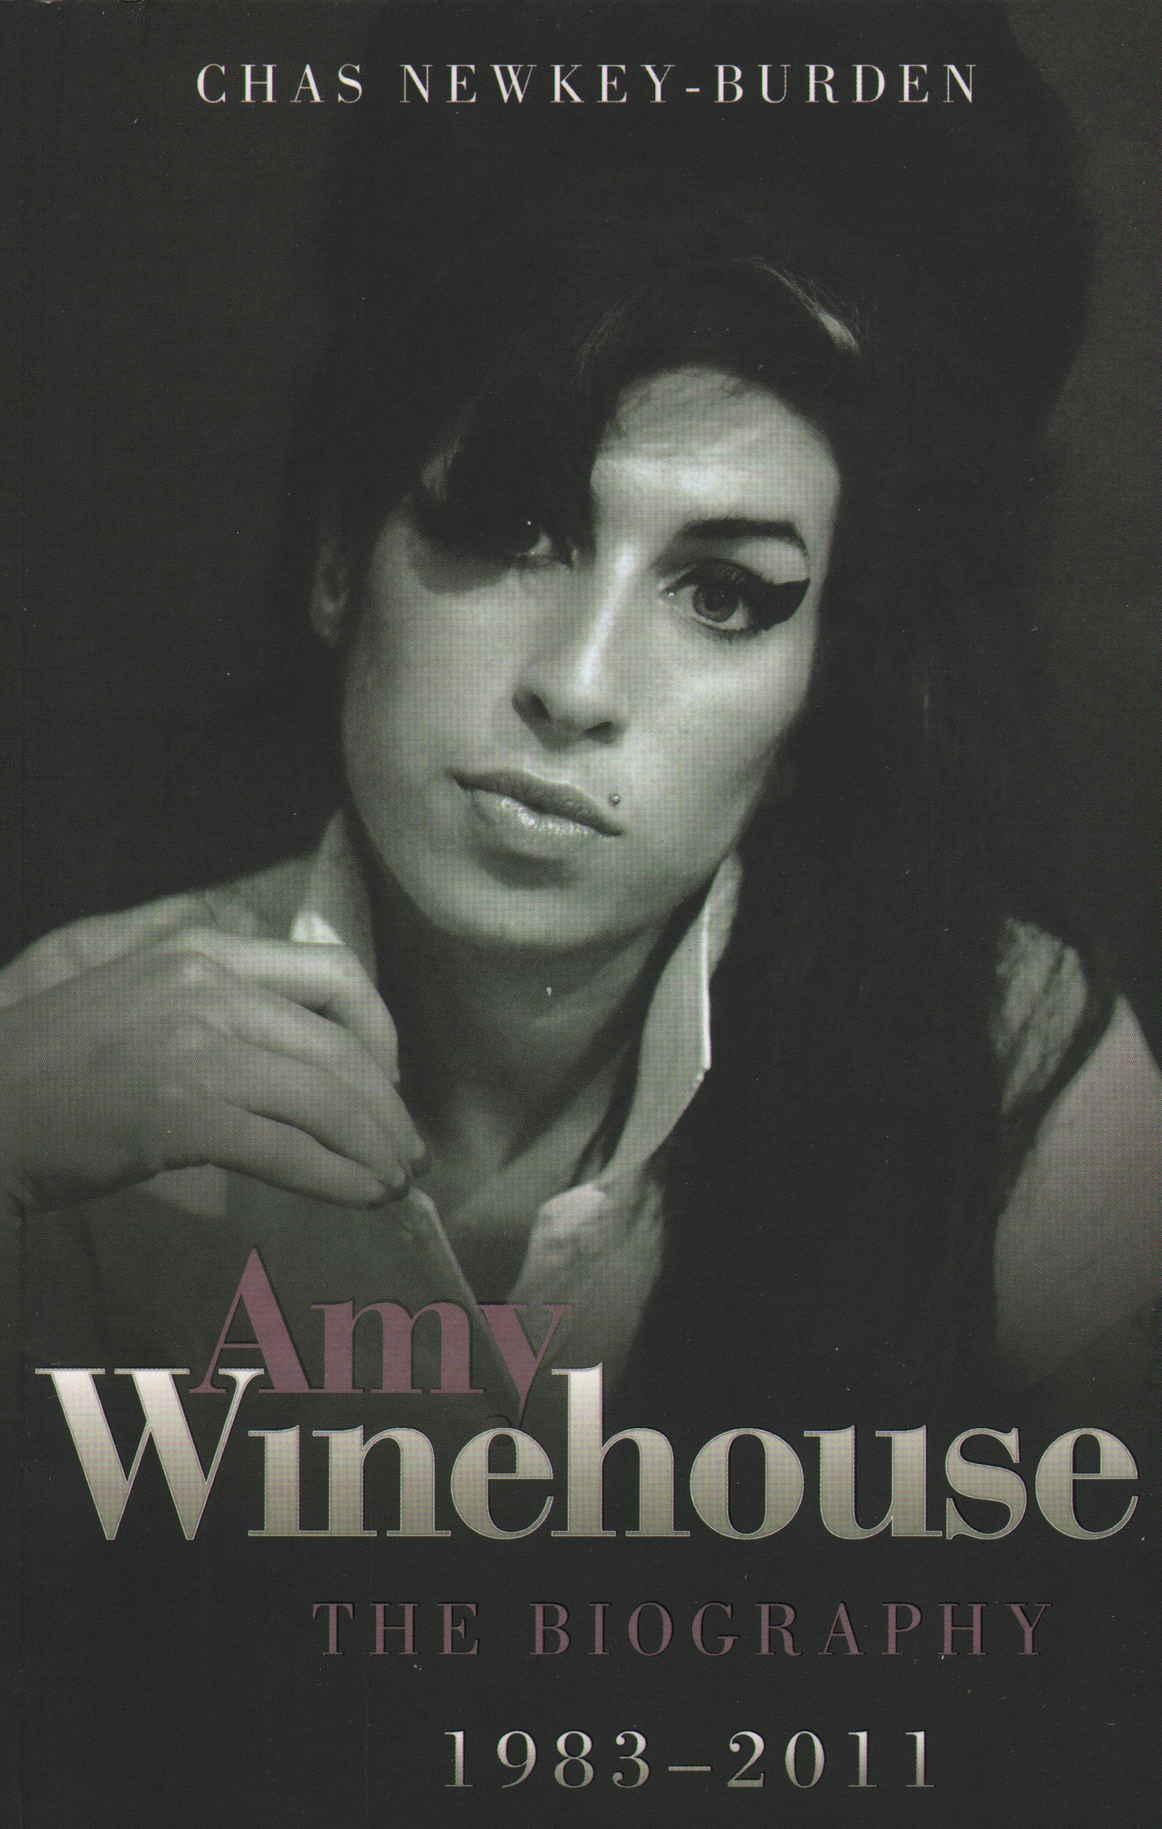 Amy Winehouse - The Biography 1983-2011 - Chas Newkey-Burden